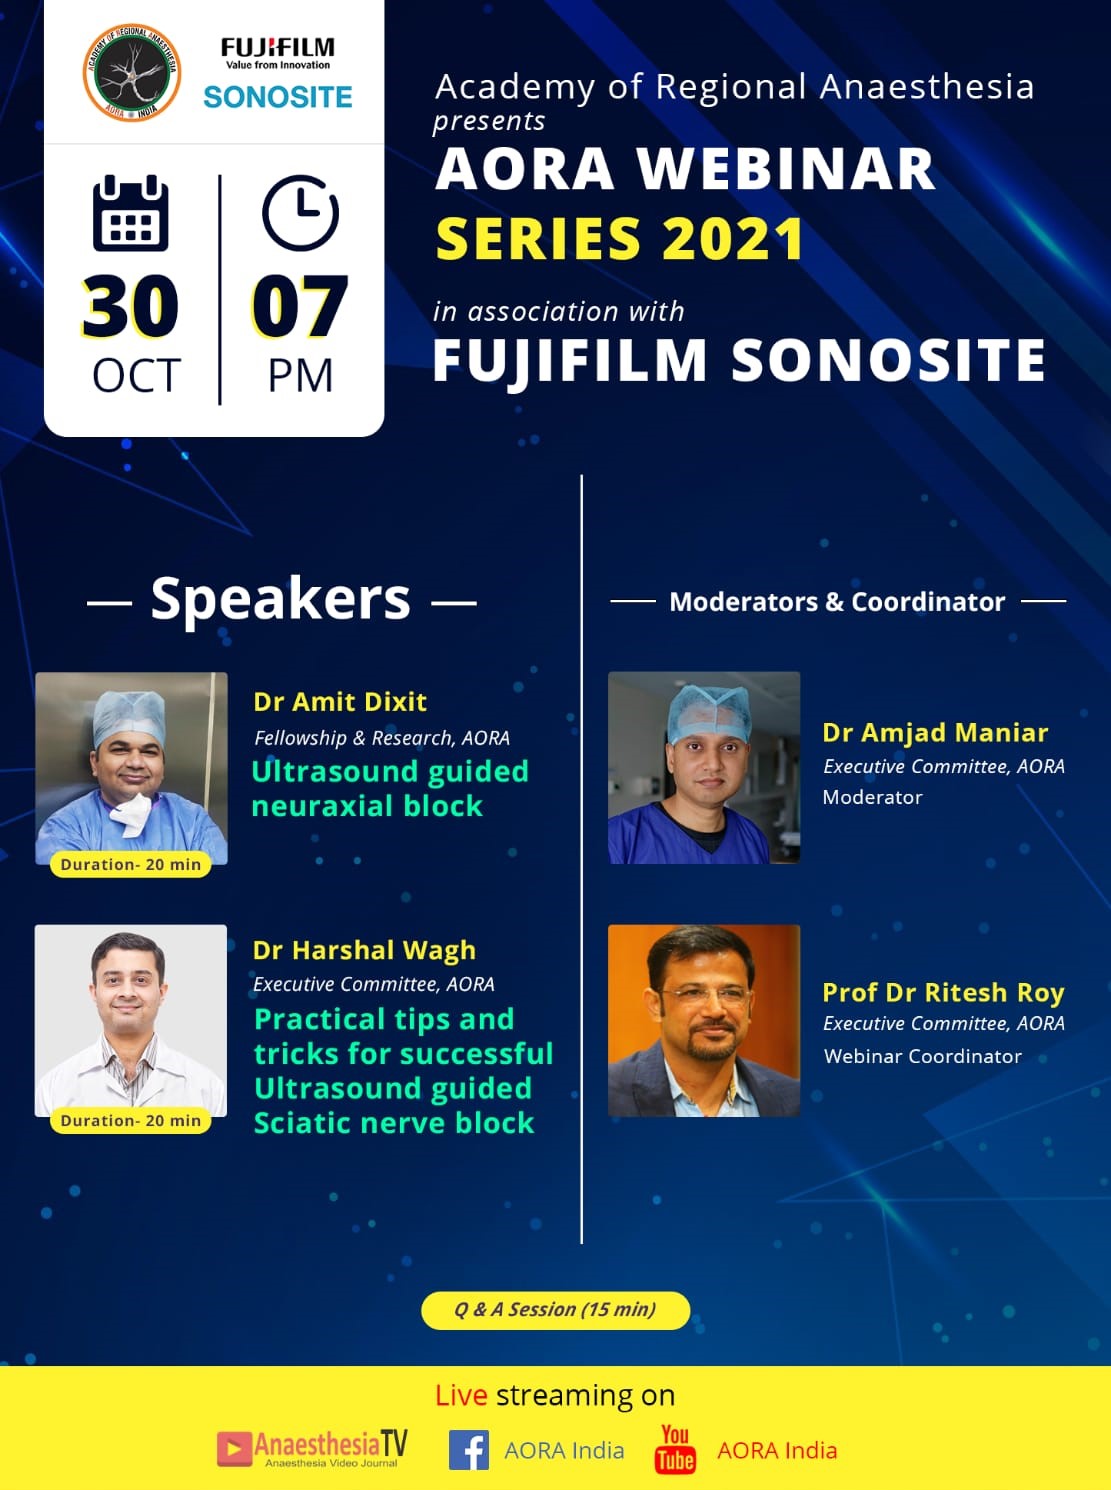 AORA Scientific Program on Ultrasound Guided Neuraxial Block and Practical tips and tricks for successful ultrasound guided Sciatic Nerve Block